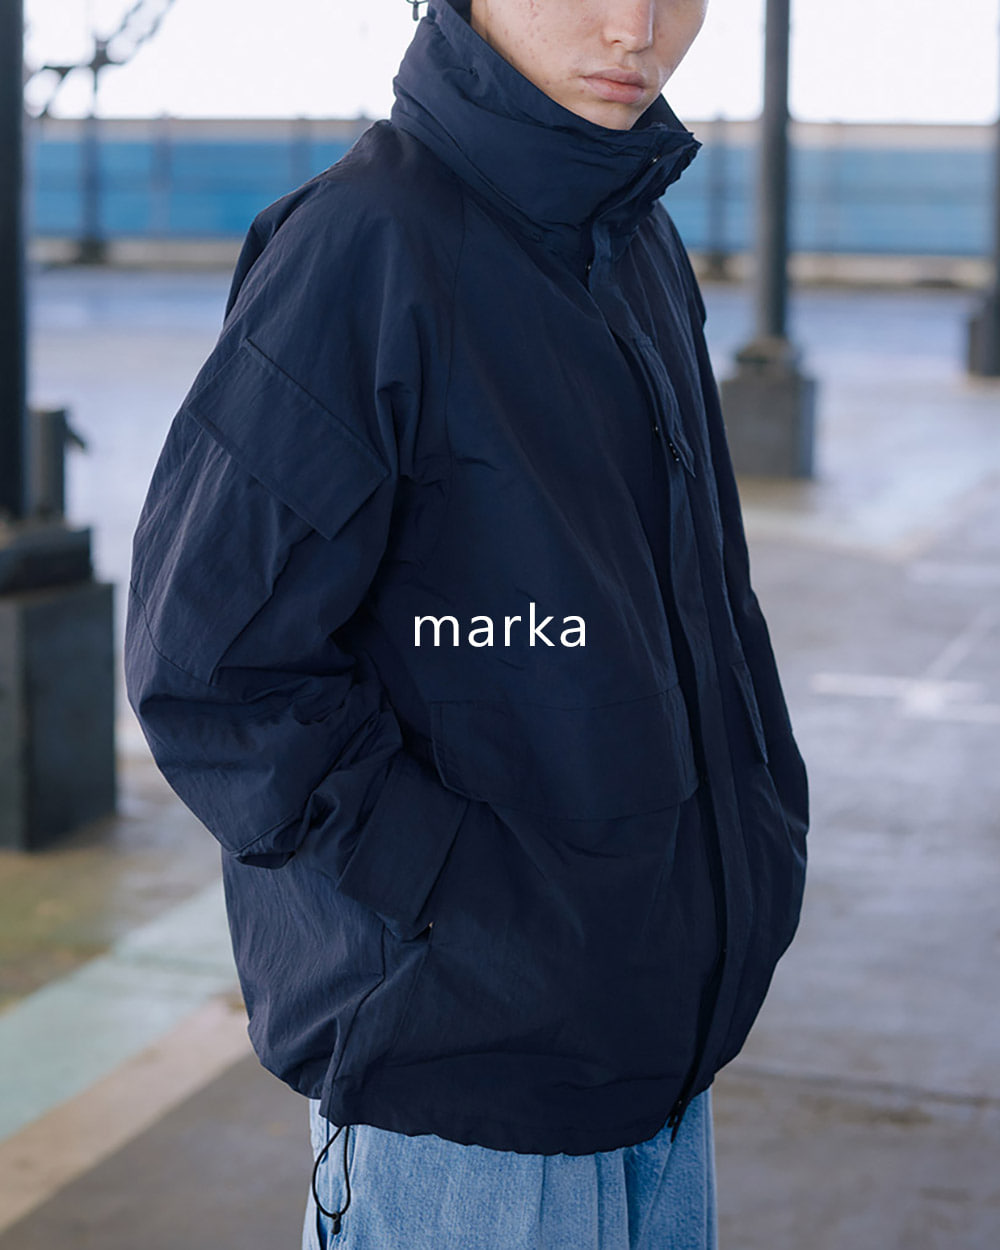 marka 2022 Fall/Winter Collection